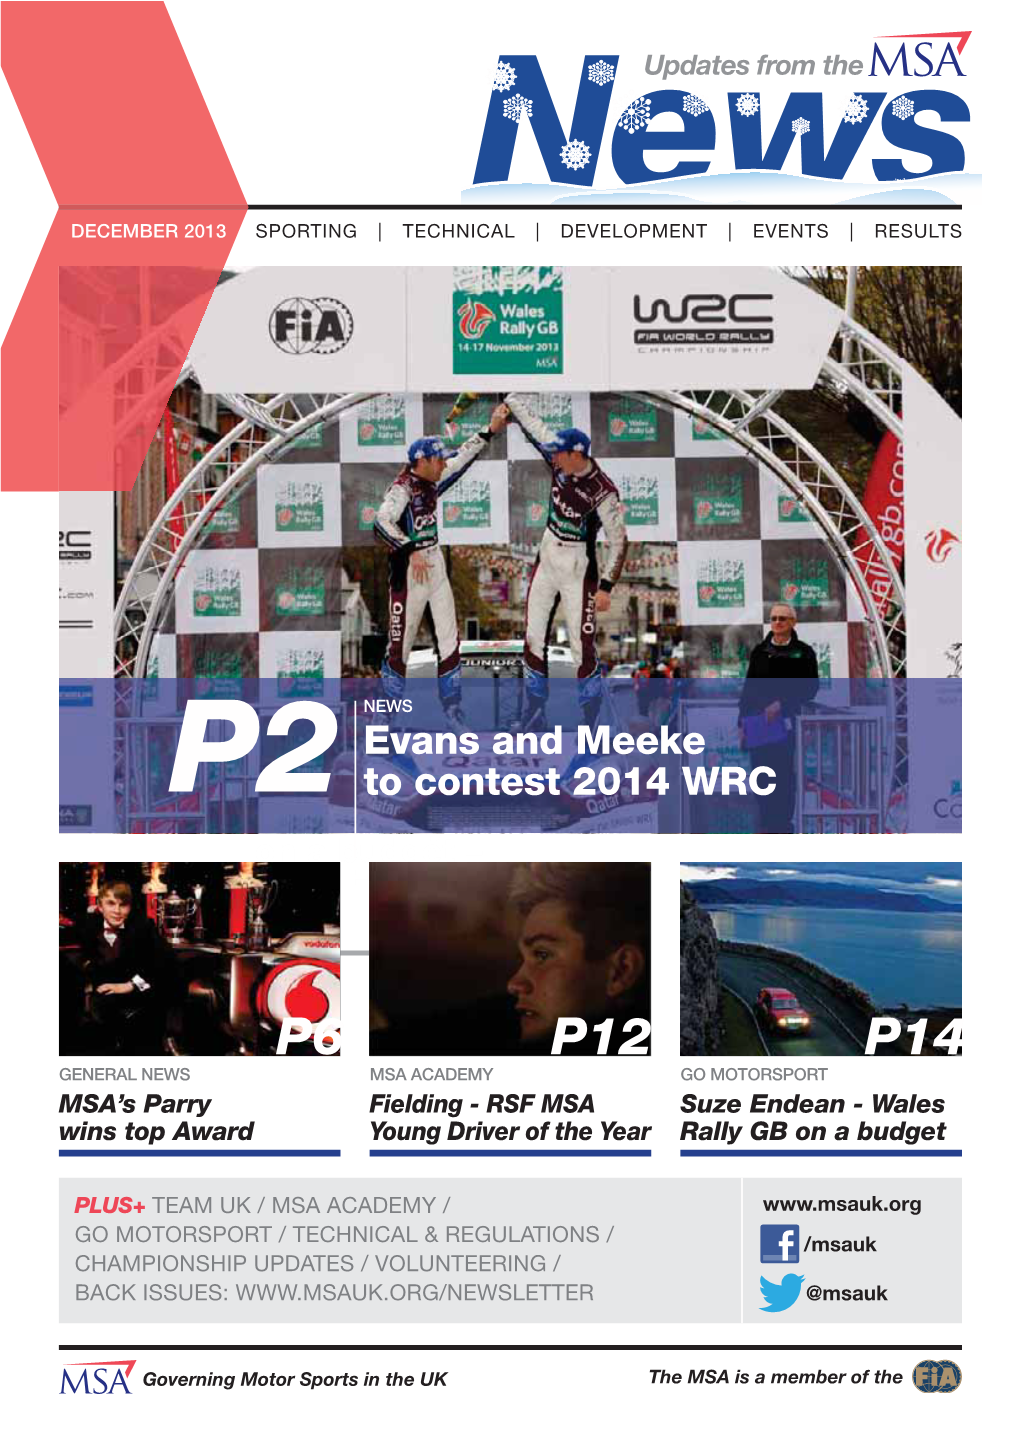 P6 P12 P14 GENERAL NEWS MSA ACADEMY GO MOTORSPORT MSA’S Parry Fielding - RSF MSA Suze Endean - Wales Wins Top Award Young Driver of the Year Rally GB on a Budget